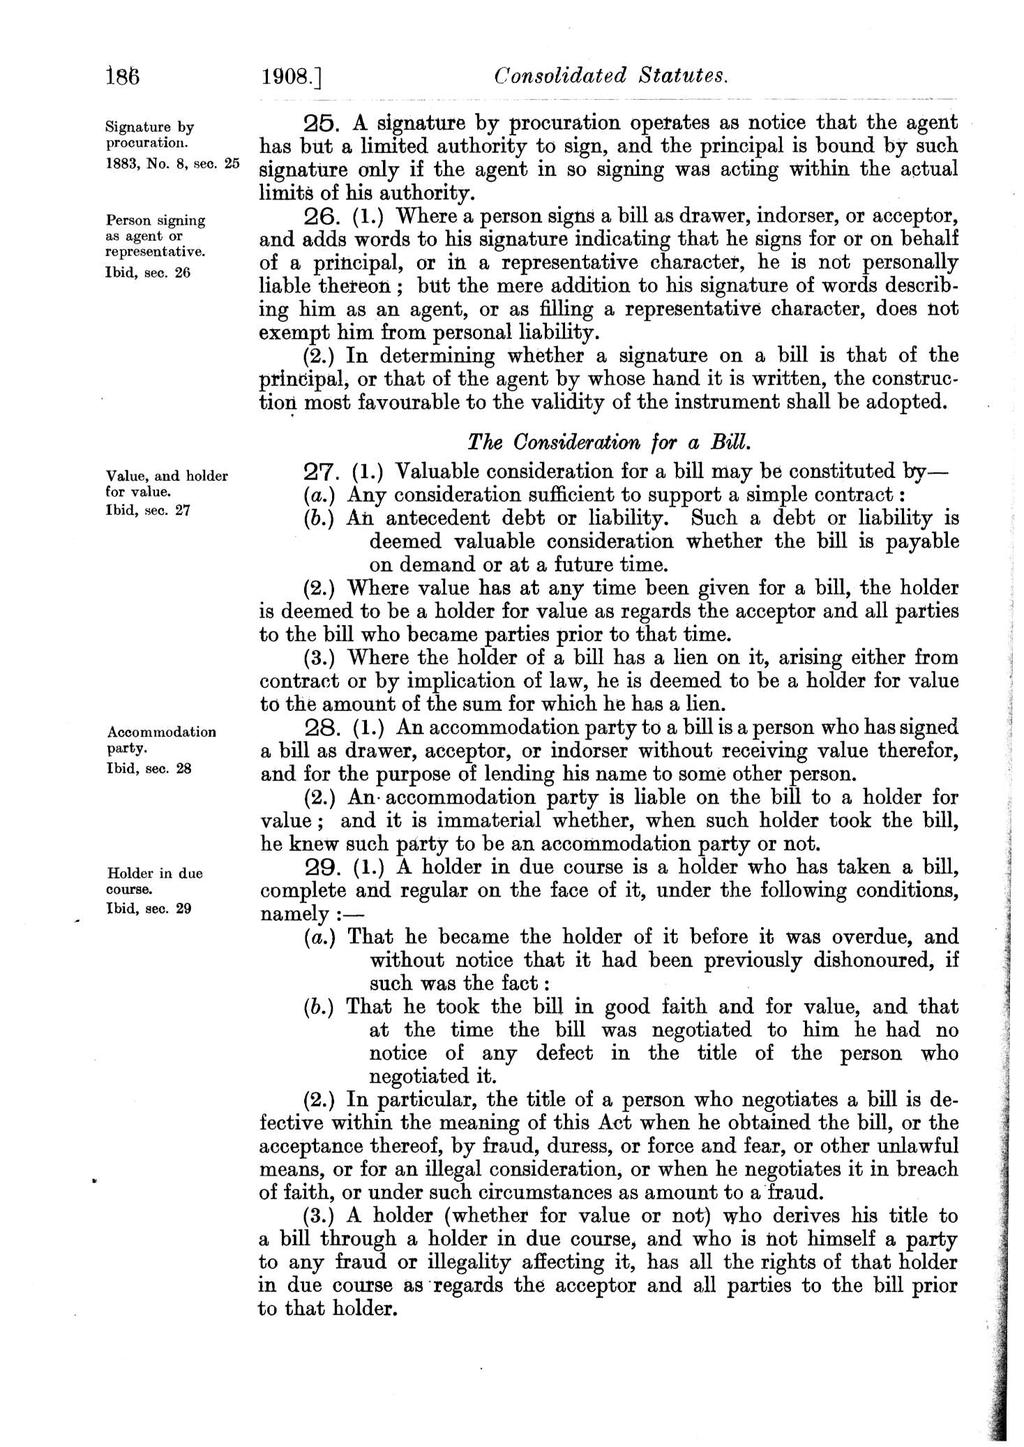 186 1908.] Signature by procuration. 1883, No. 8, sec. 25 Person signing as agent or representative. Ibid, sec. 26 Value, and holder for value. Ibid, sec. 27 Accommodation party. Ibid, sec. 28 Holder in due course.